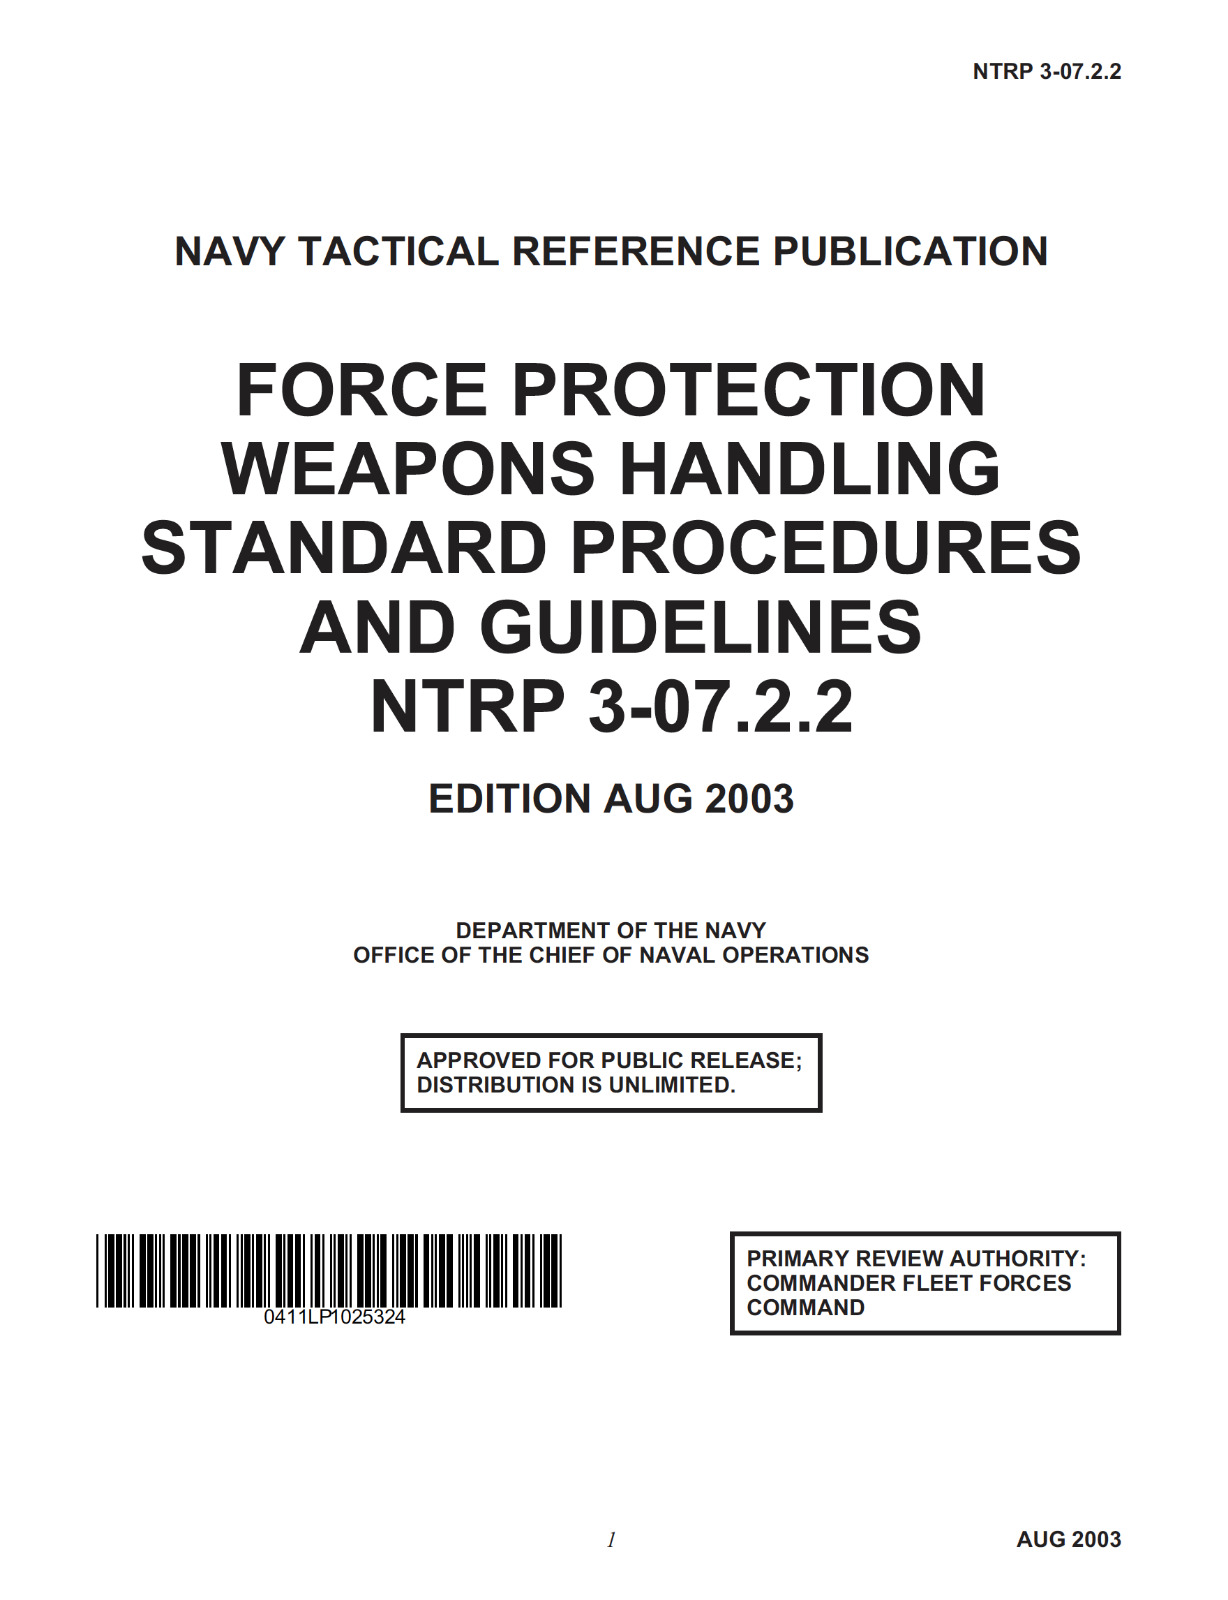 244 Page Navy FORCE PROTECTION WEAPONS HANDLING STANDARD PROCEDURES Manual on CD